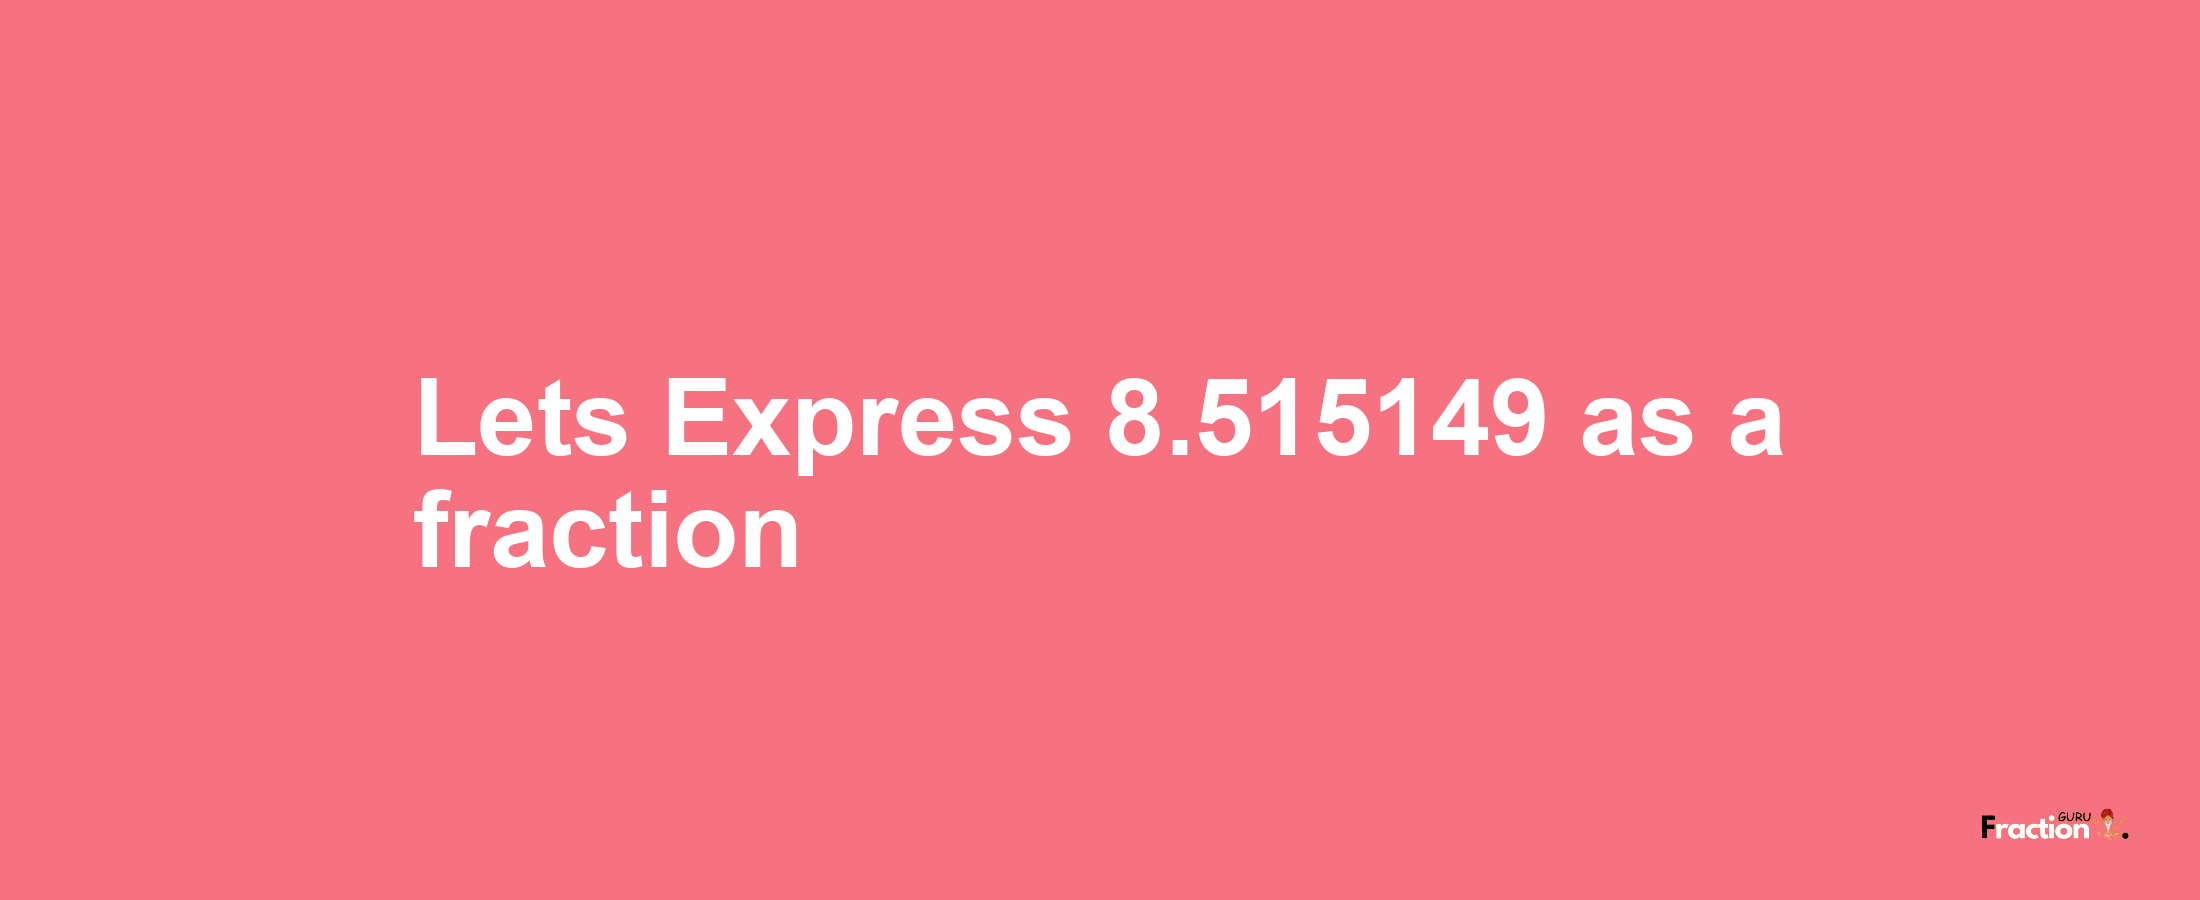 Lets Express 8.515149 as afraction